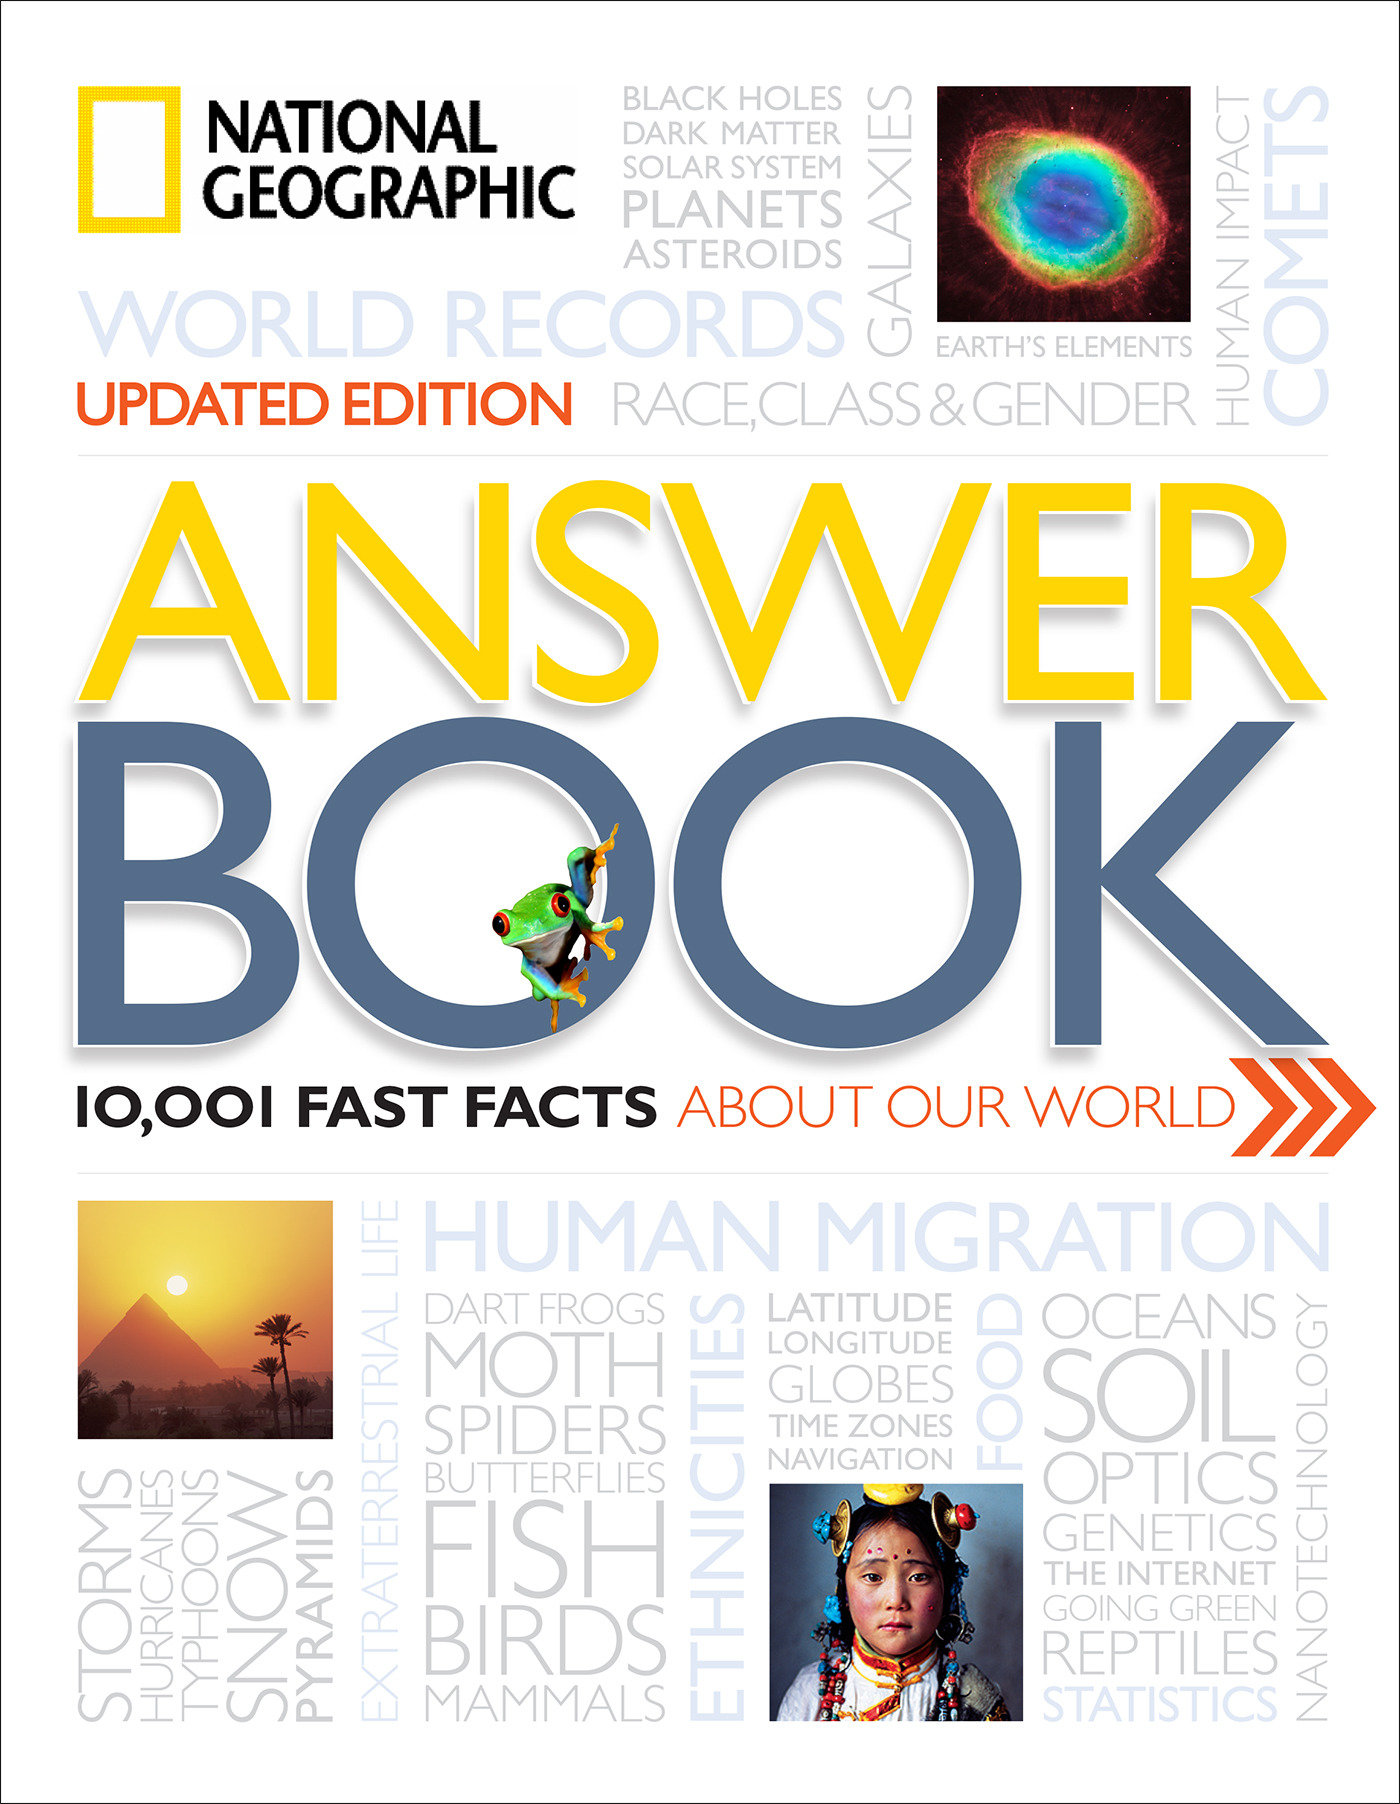 National Geographic Answer Book, Updated Edition (Hardcover Book)